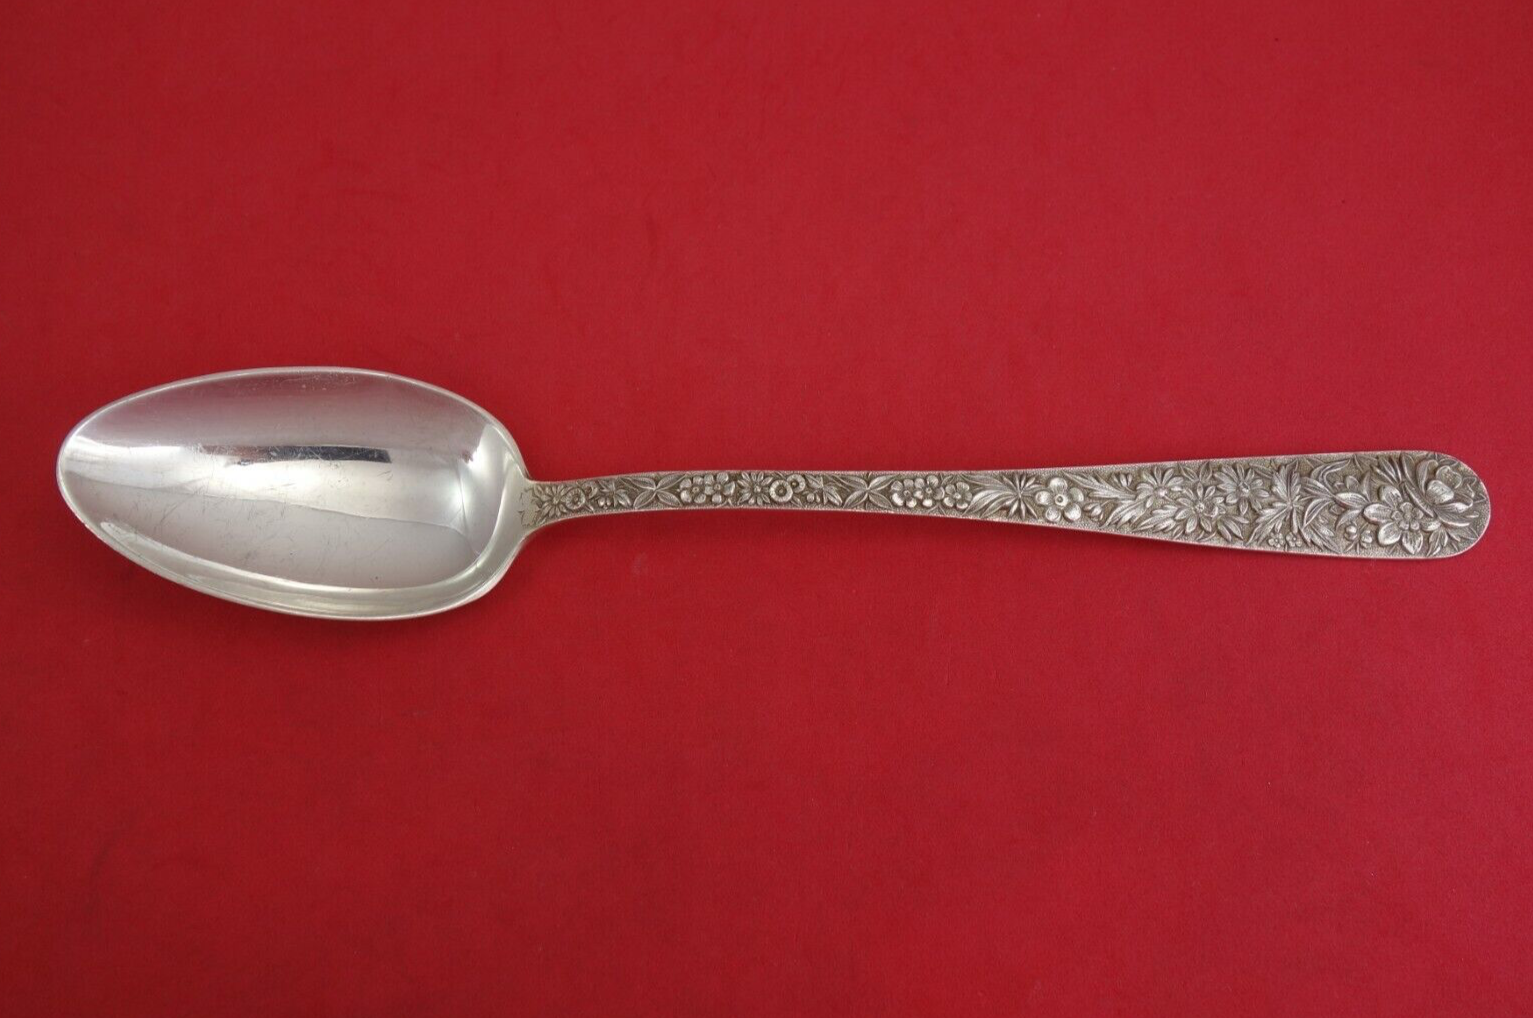 Primary image for Repousse by Kirk Sterling Silver Platter Spoon 925-1000 very unique 11 3/4"